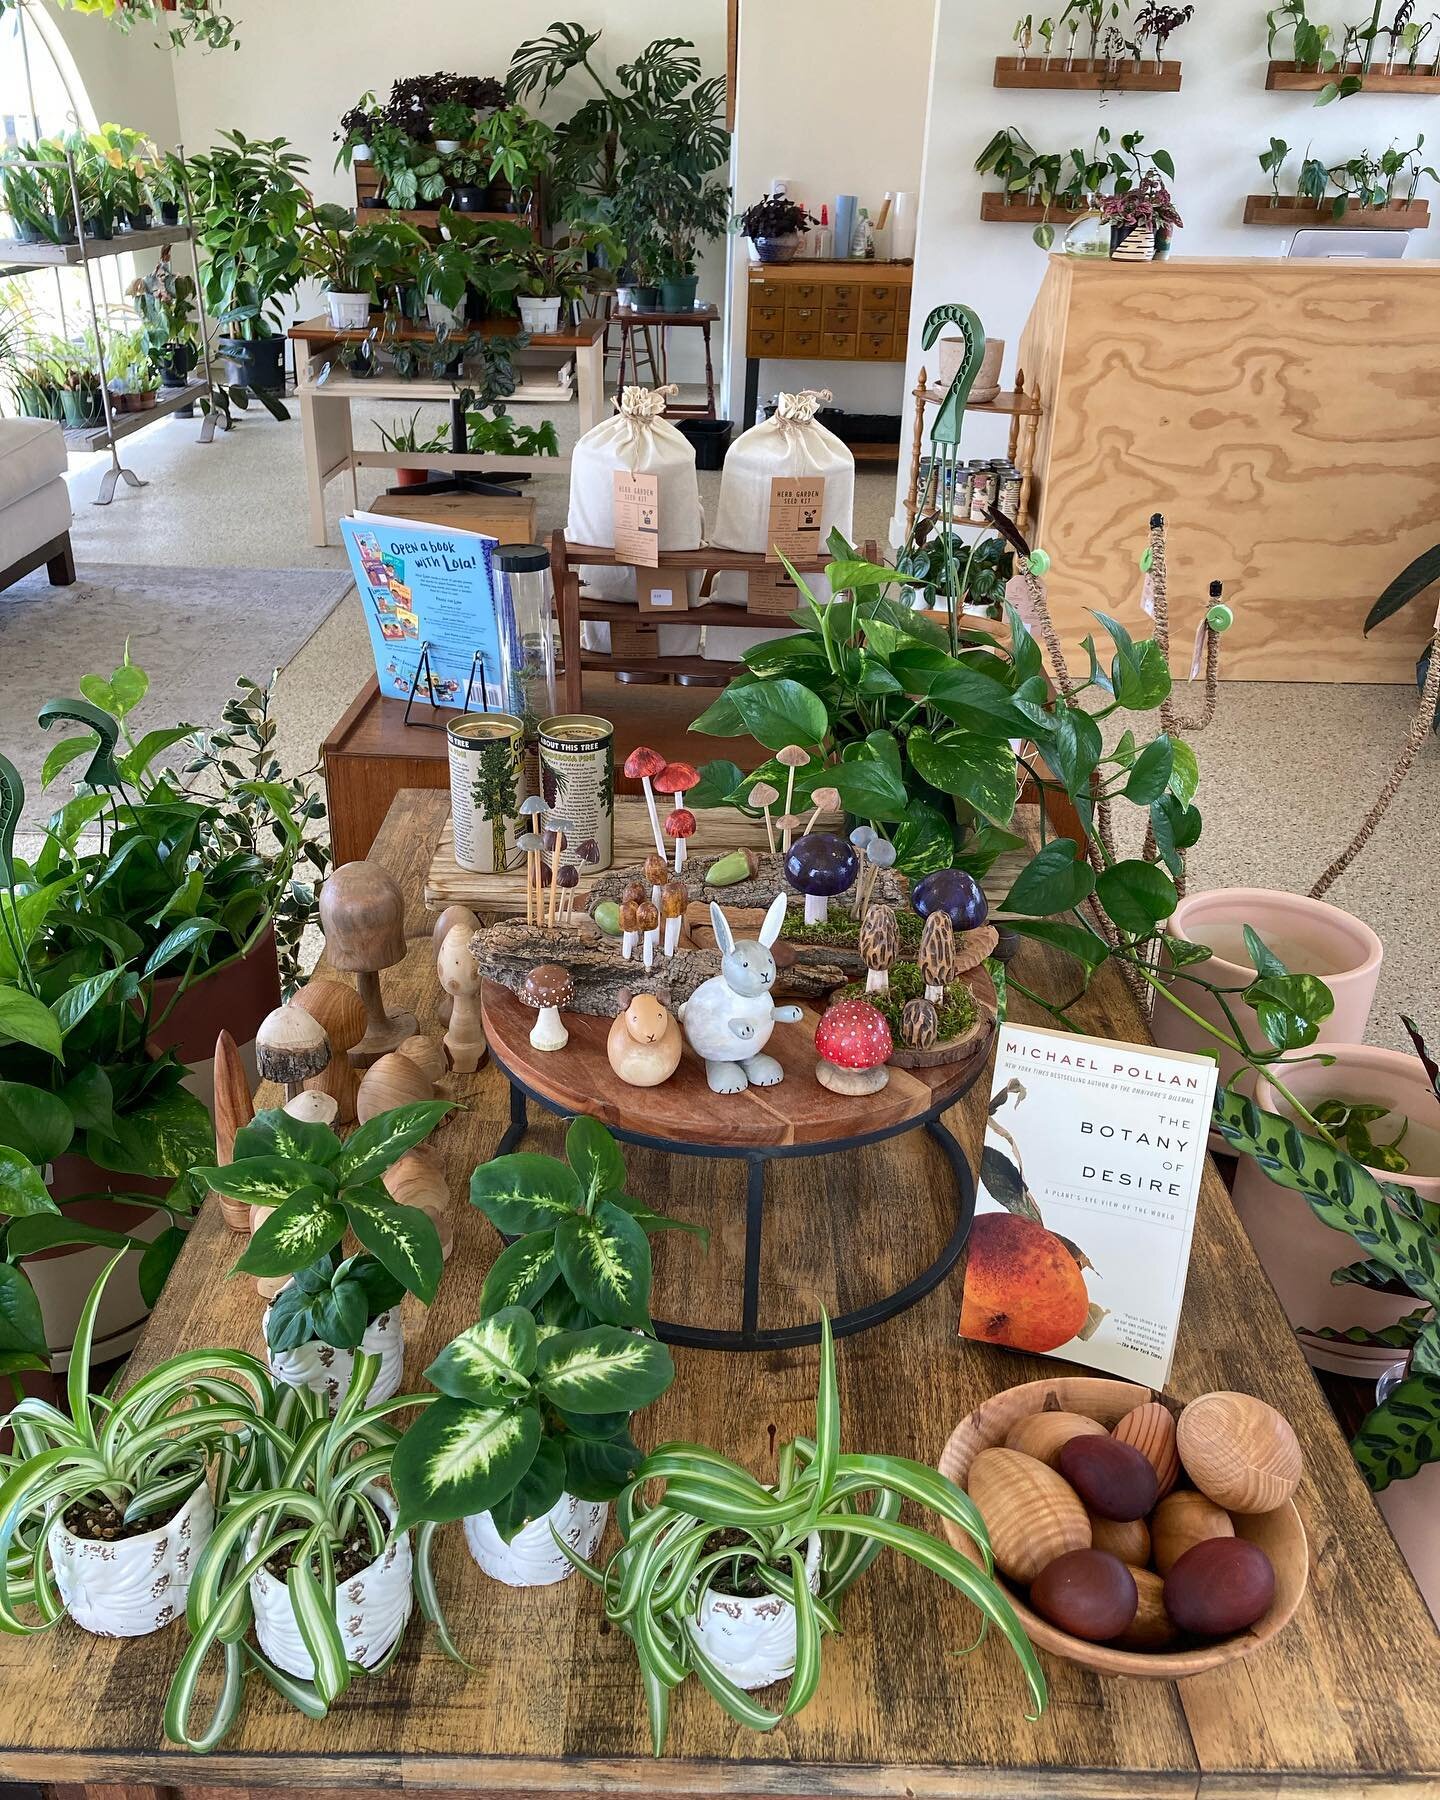 Hi friends! Lots of good stuff in the store right now! Come by and say hi 🪴We&rsquo;re open 11-5!

#plantshop #plantshopping #repot #gifts #decor #mushrooms #plants #newplants #plantmama #plantdaddy #indoorplants #indoorjungle #botanical